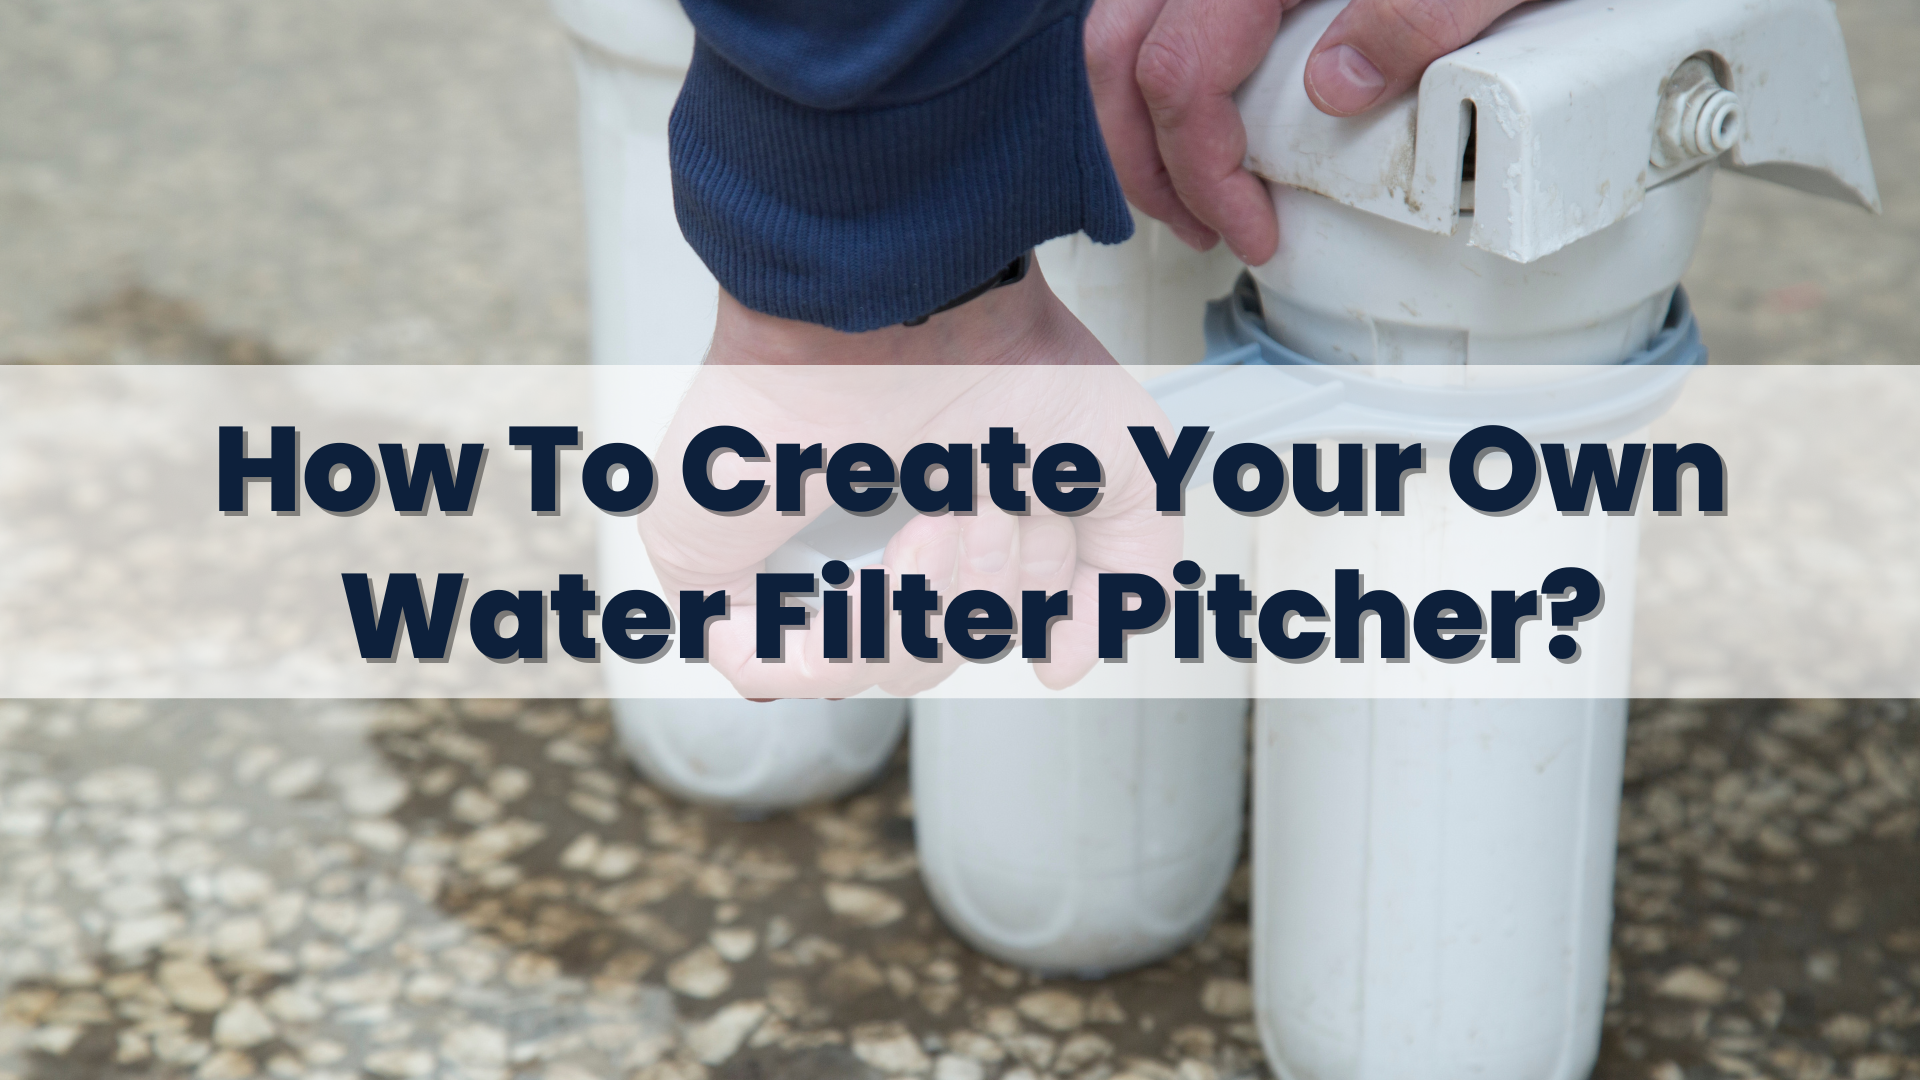 How To Create Your Own Water Filter Pitcher